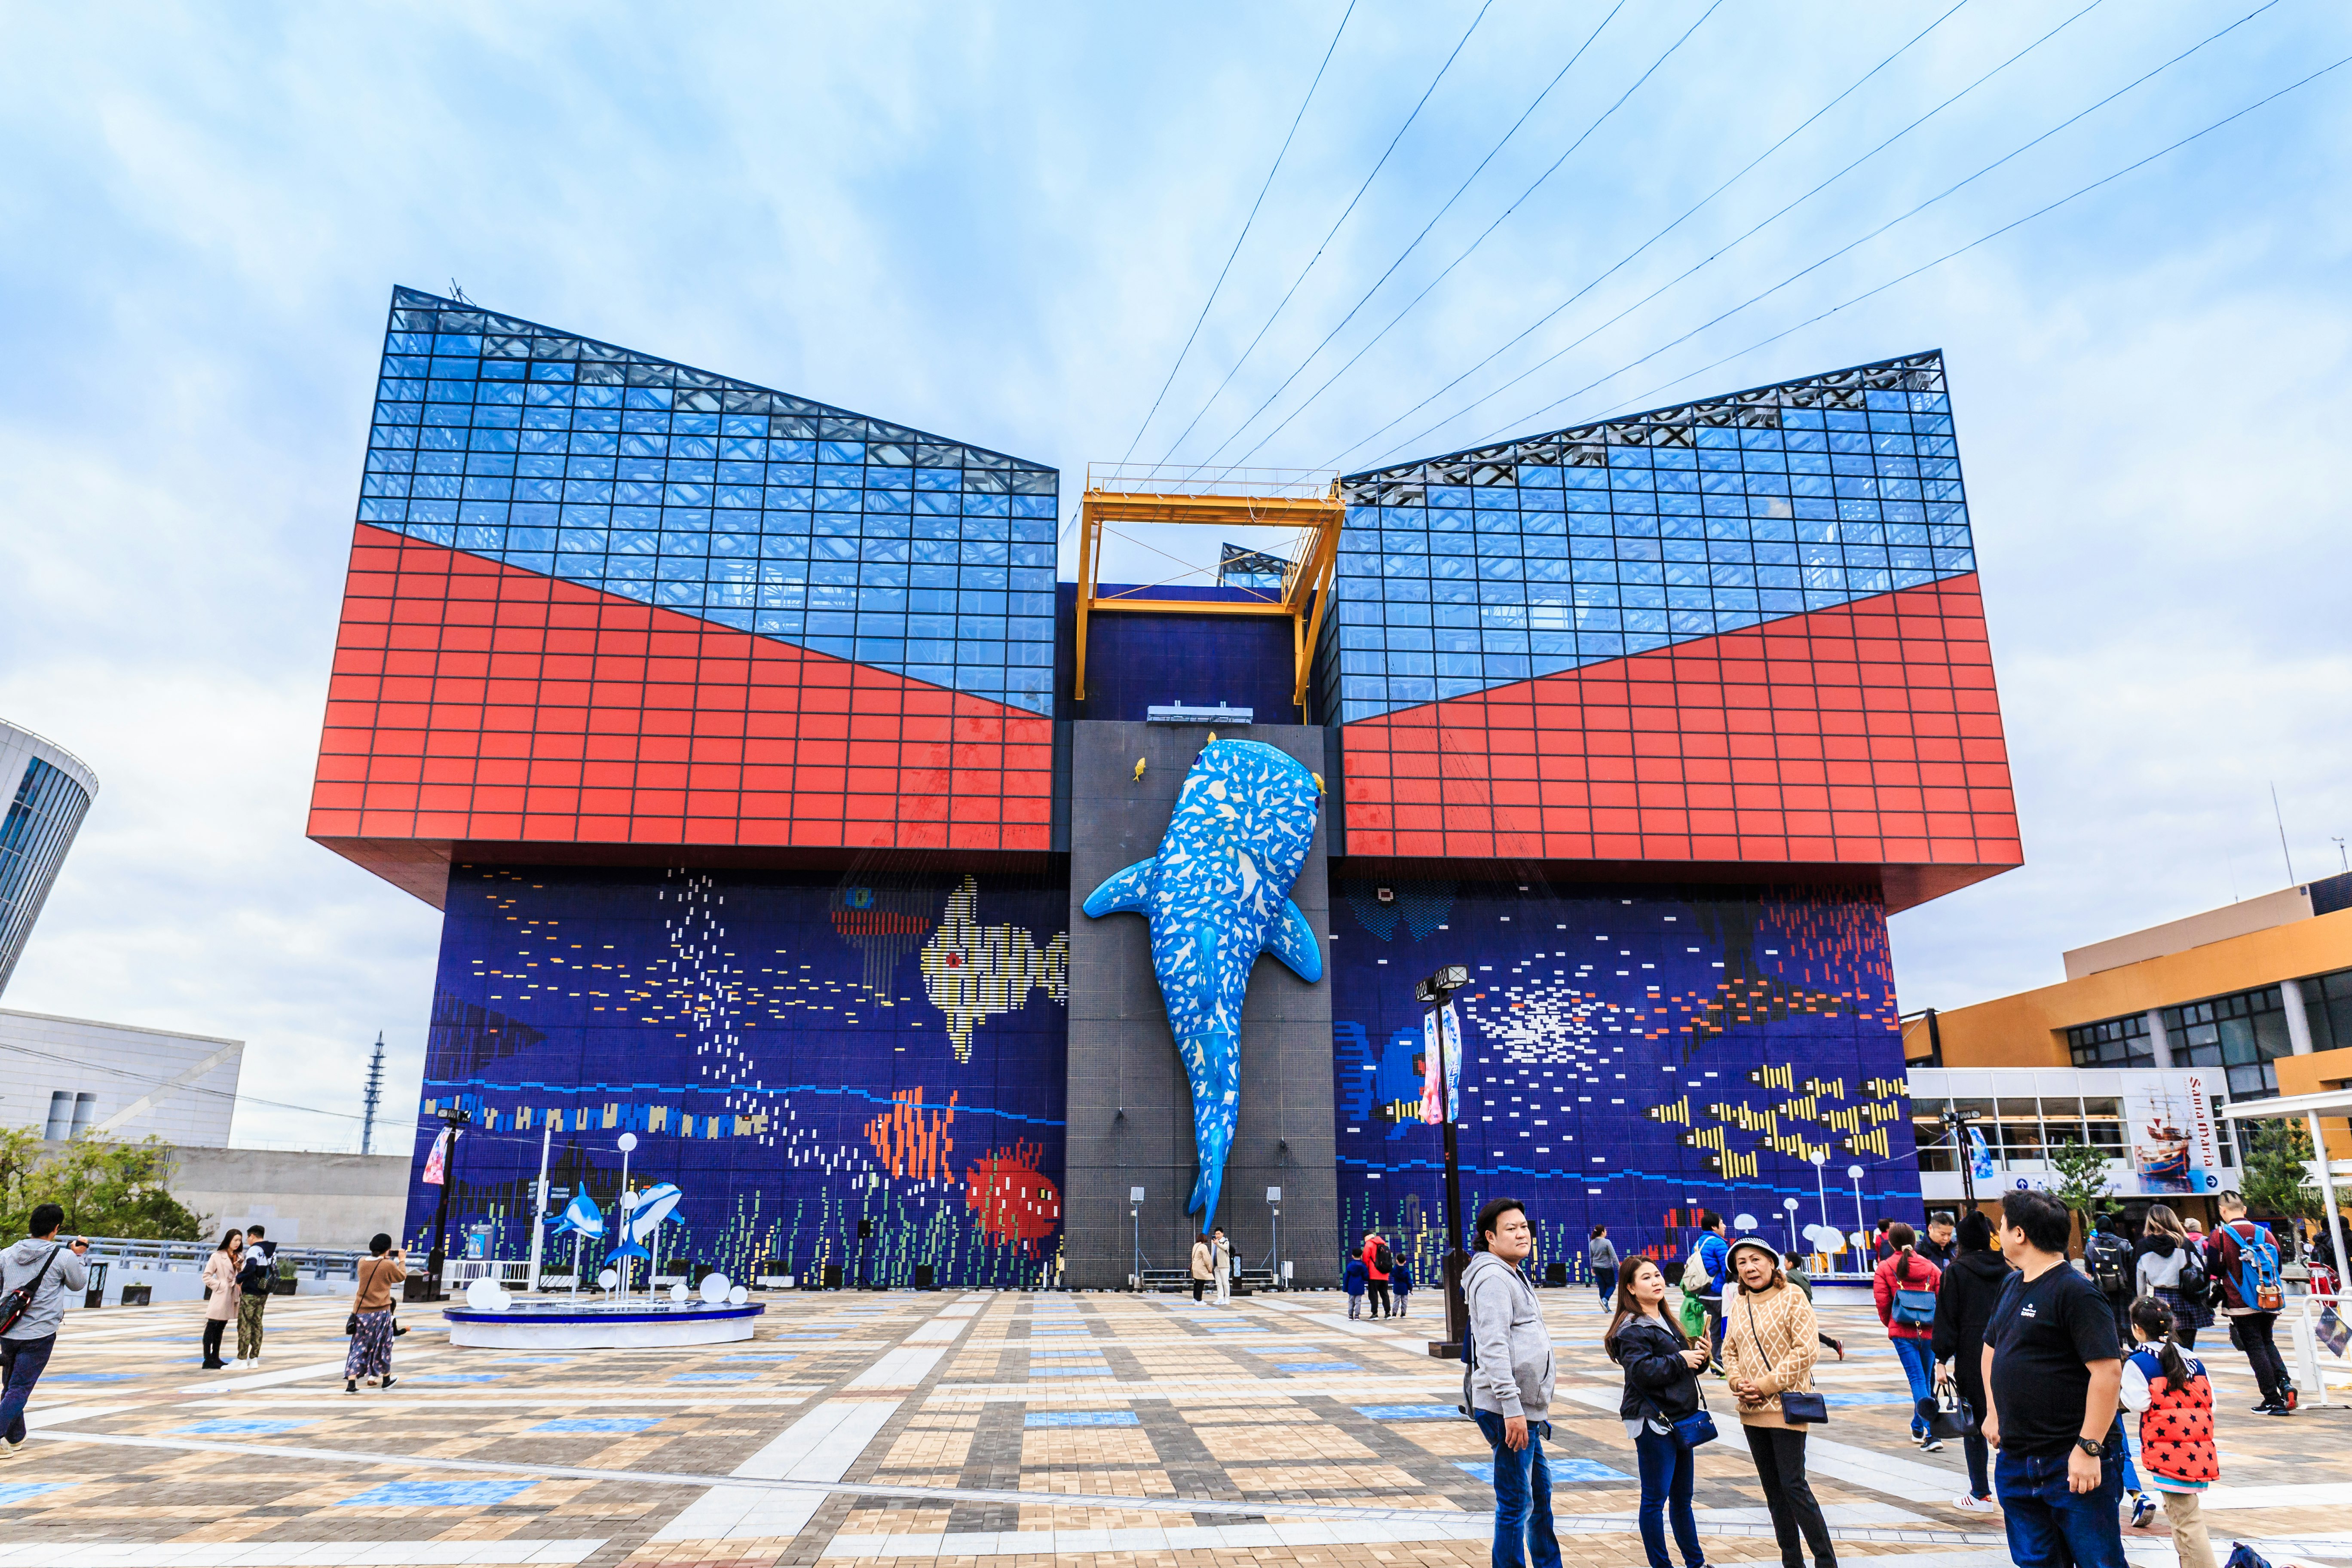 The facade of the aquarium is predominantly blue and red. There's a large fish sculpture as the centrepiece, with a mosaic of different smaller fish either side